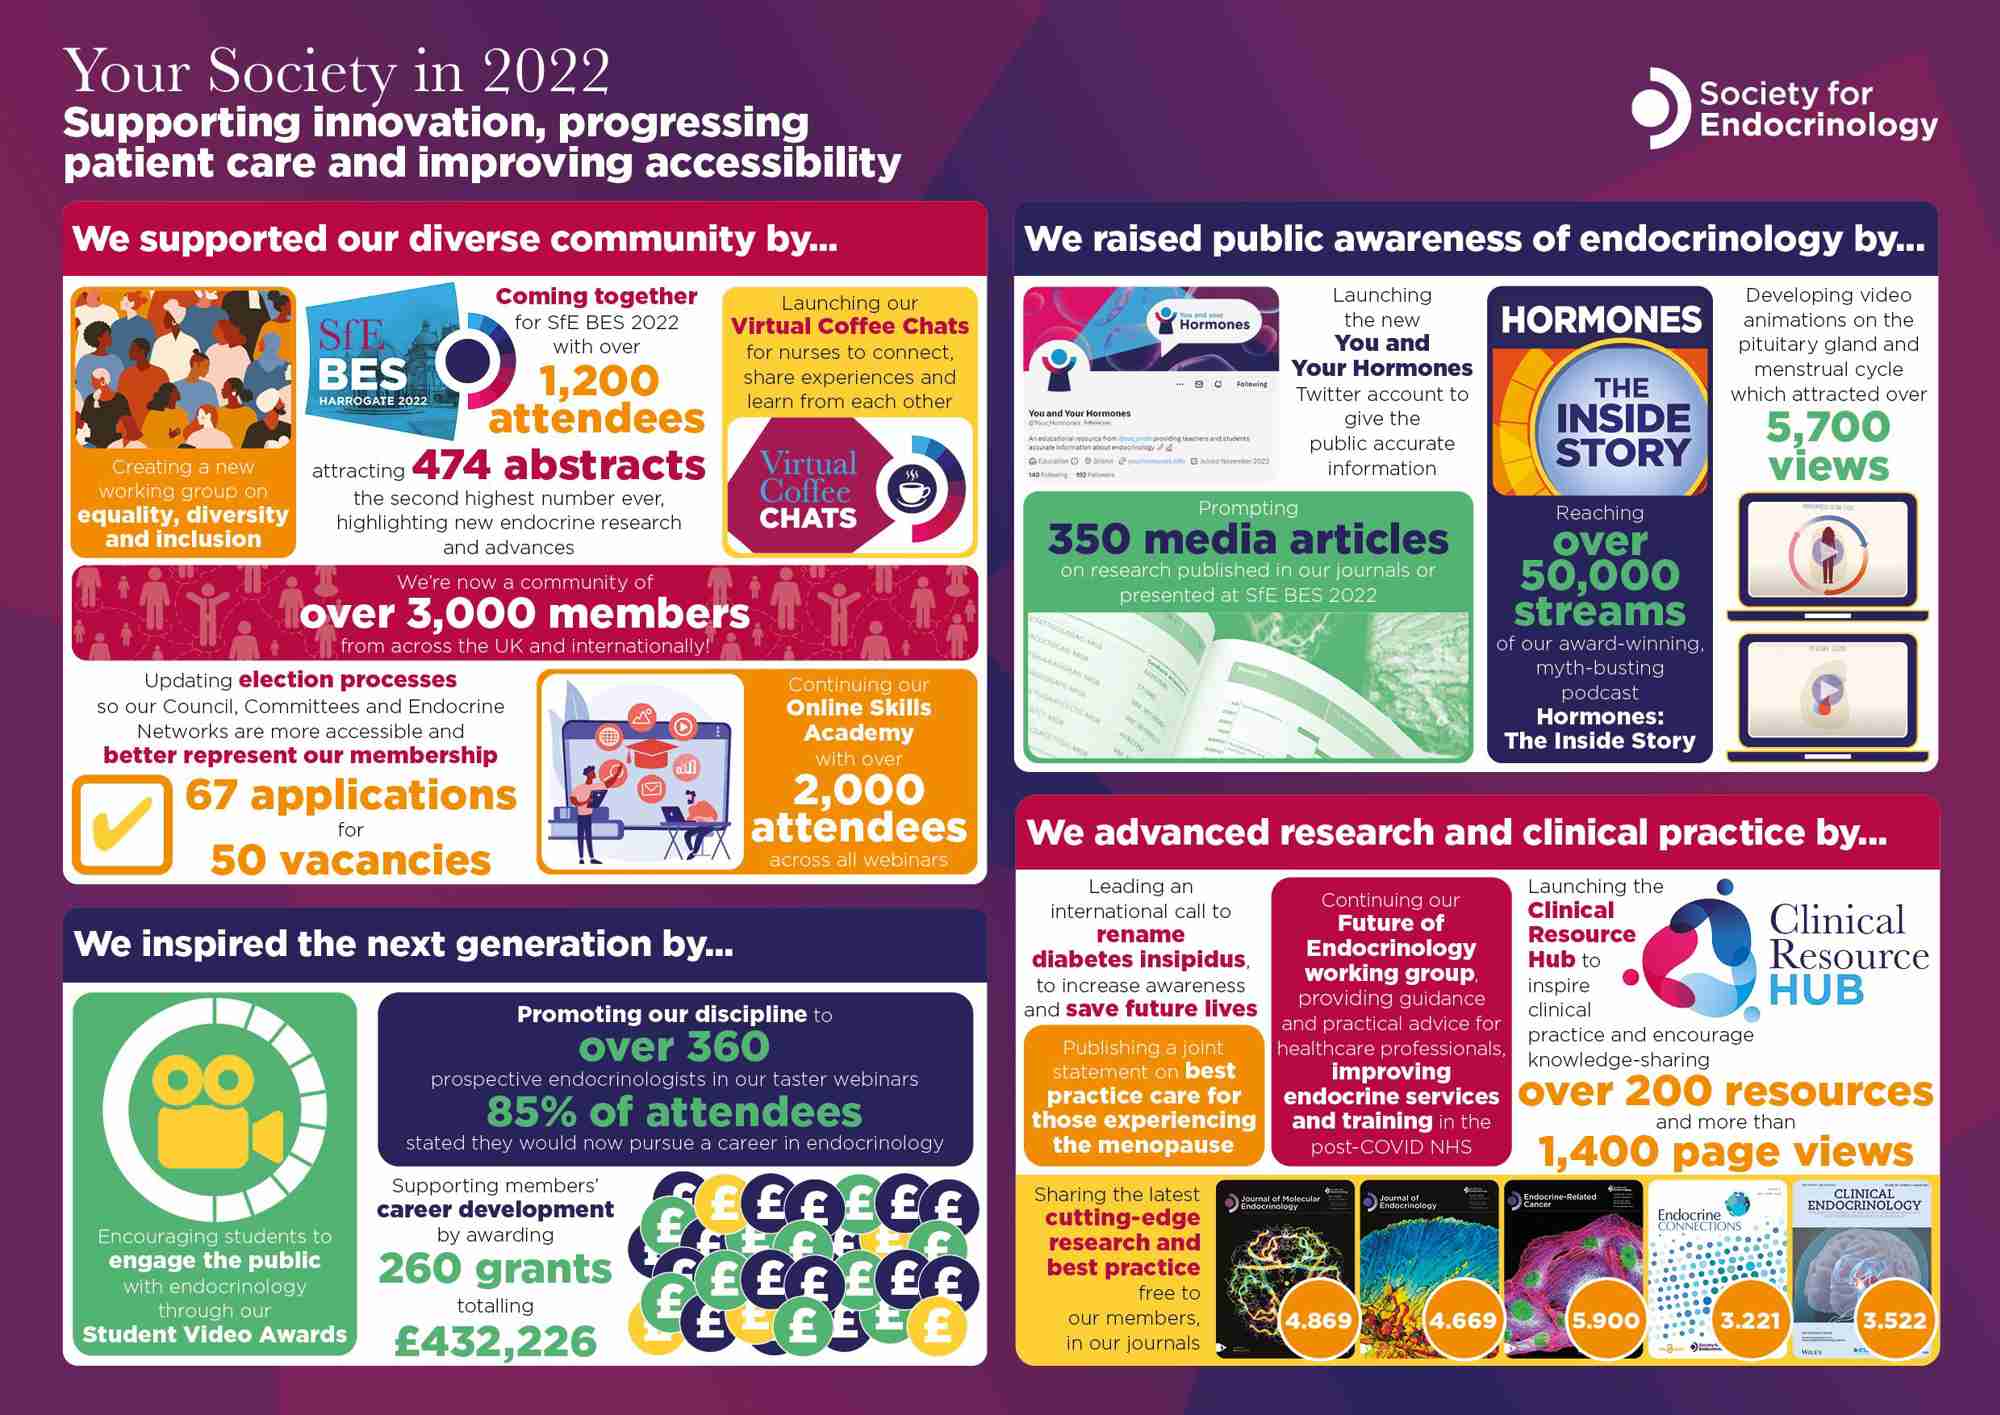 Society for Endocrinology Achievements 2022